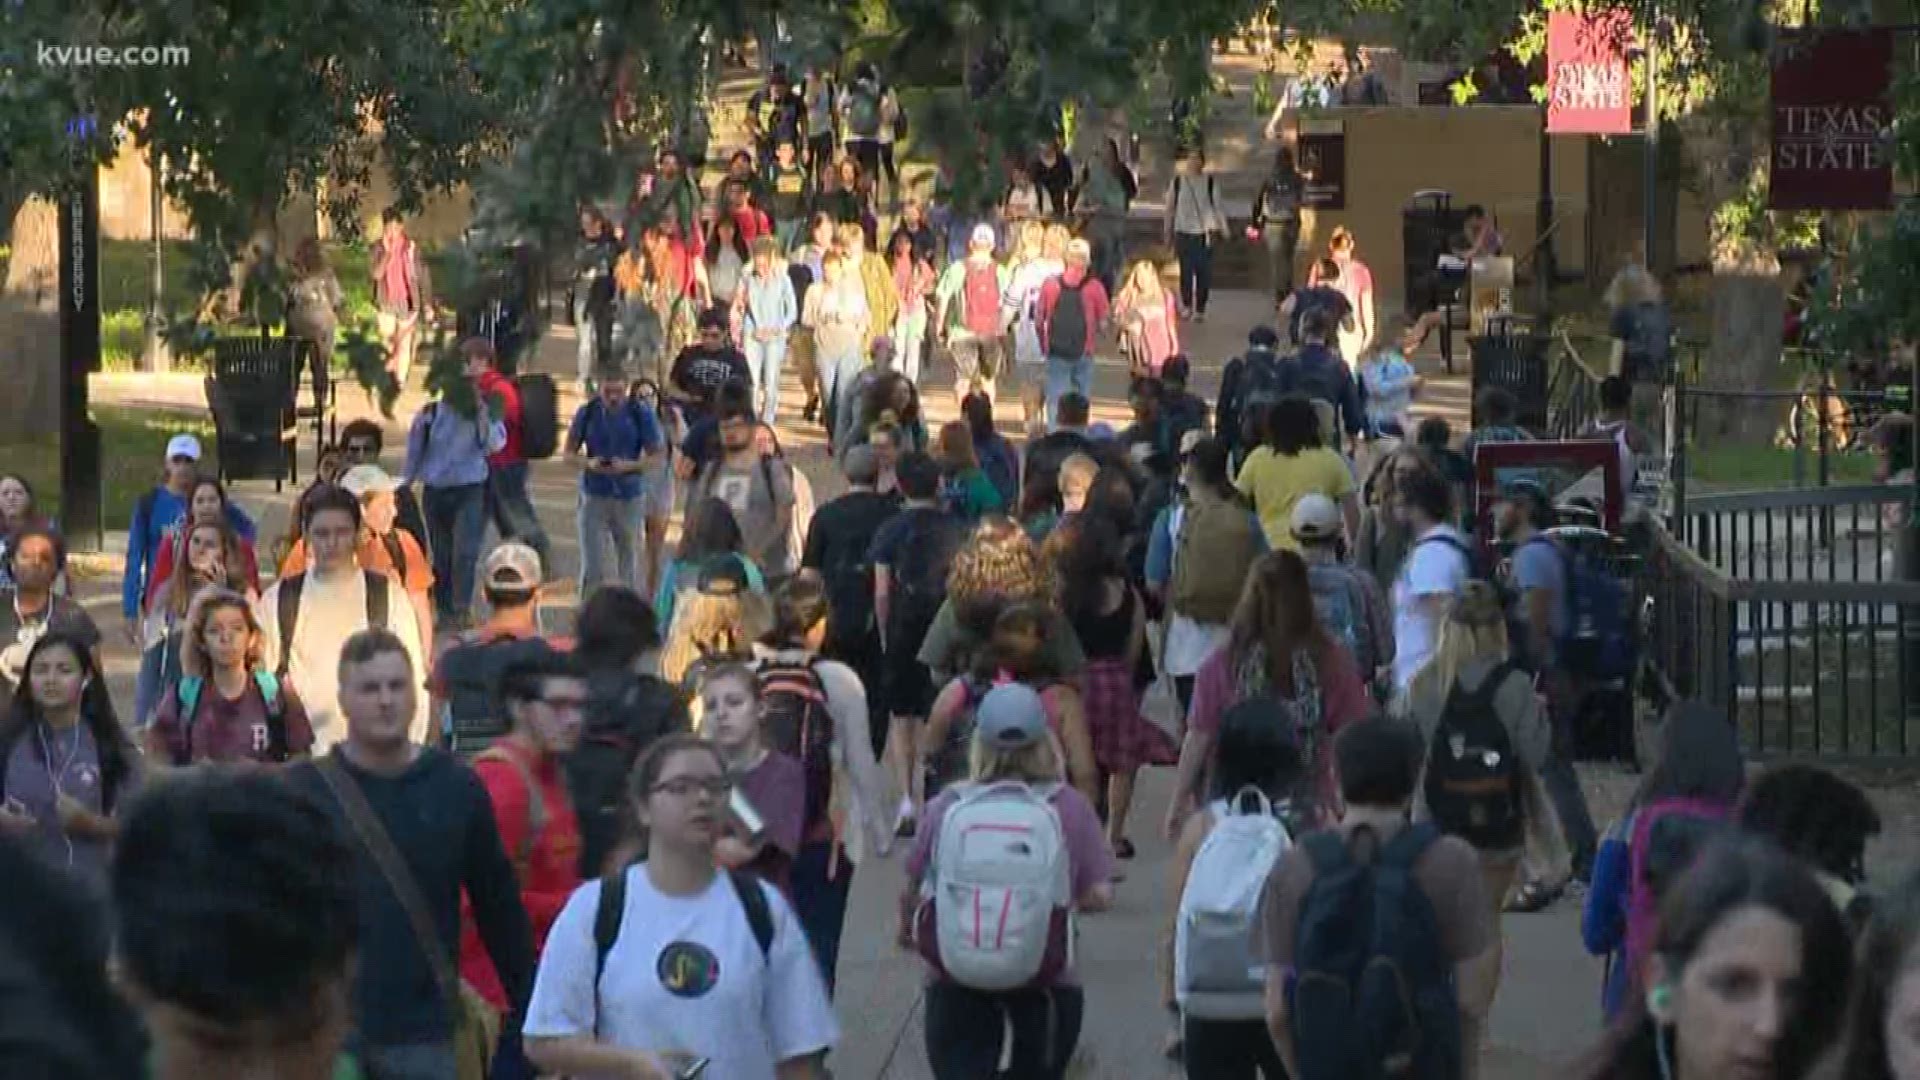 At least two Texas state university students have come down with the mumps and more students could be at risk.